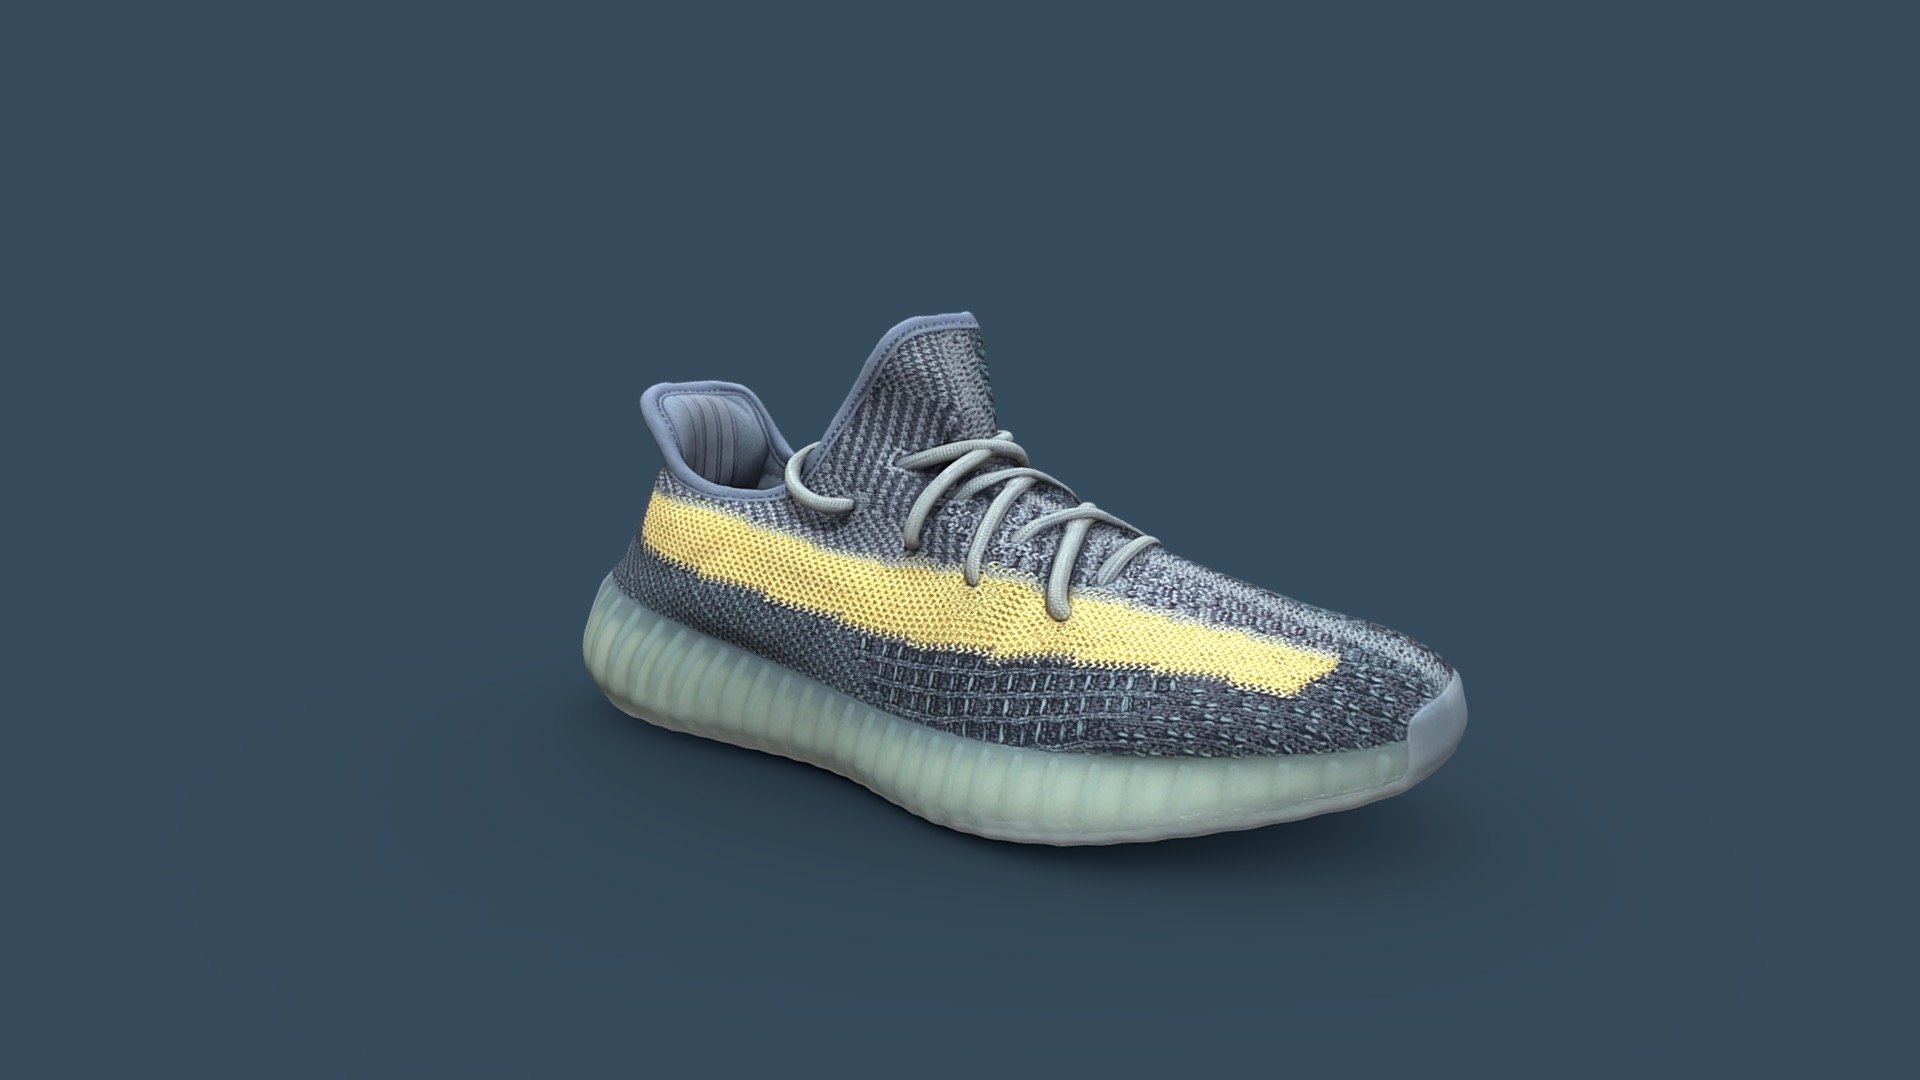 The adidas Yeezy Boost 350 V2 ‘Ash Blue’ carries a re-engineered Primeknit upper constructed from a blend of slate blue, grey and black fibers. A pale yellow hue distinguishes the post-dyed monofilament side stripe woven into the sneaker’s lateral side panel, delivering added breathability and an unexpected pop of color. The sock-like upper rides on a full-length Boost midsole, wrapped up in a semi-translucent rubber cage for improved stability and durability.

Black Ink Immersive - Adidas Yeezy Boost 350 V2 Ash Blue - 3D model by Black Ink (@blackink) 3d model